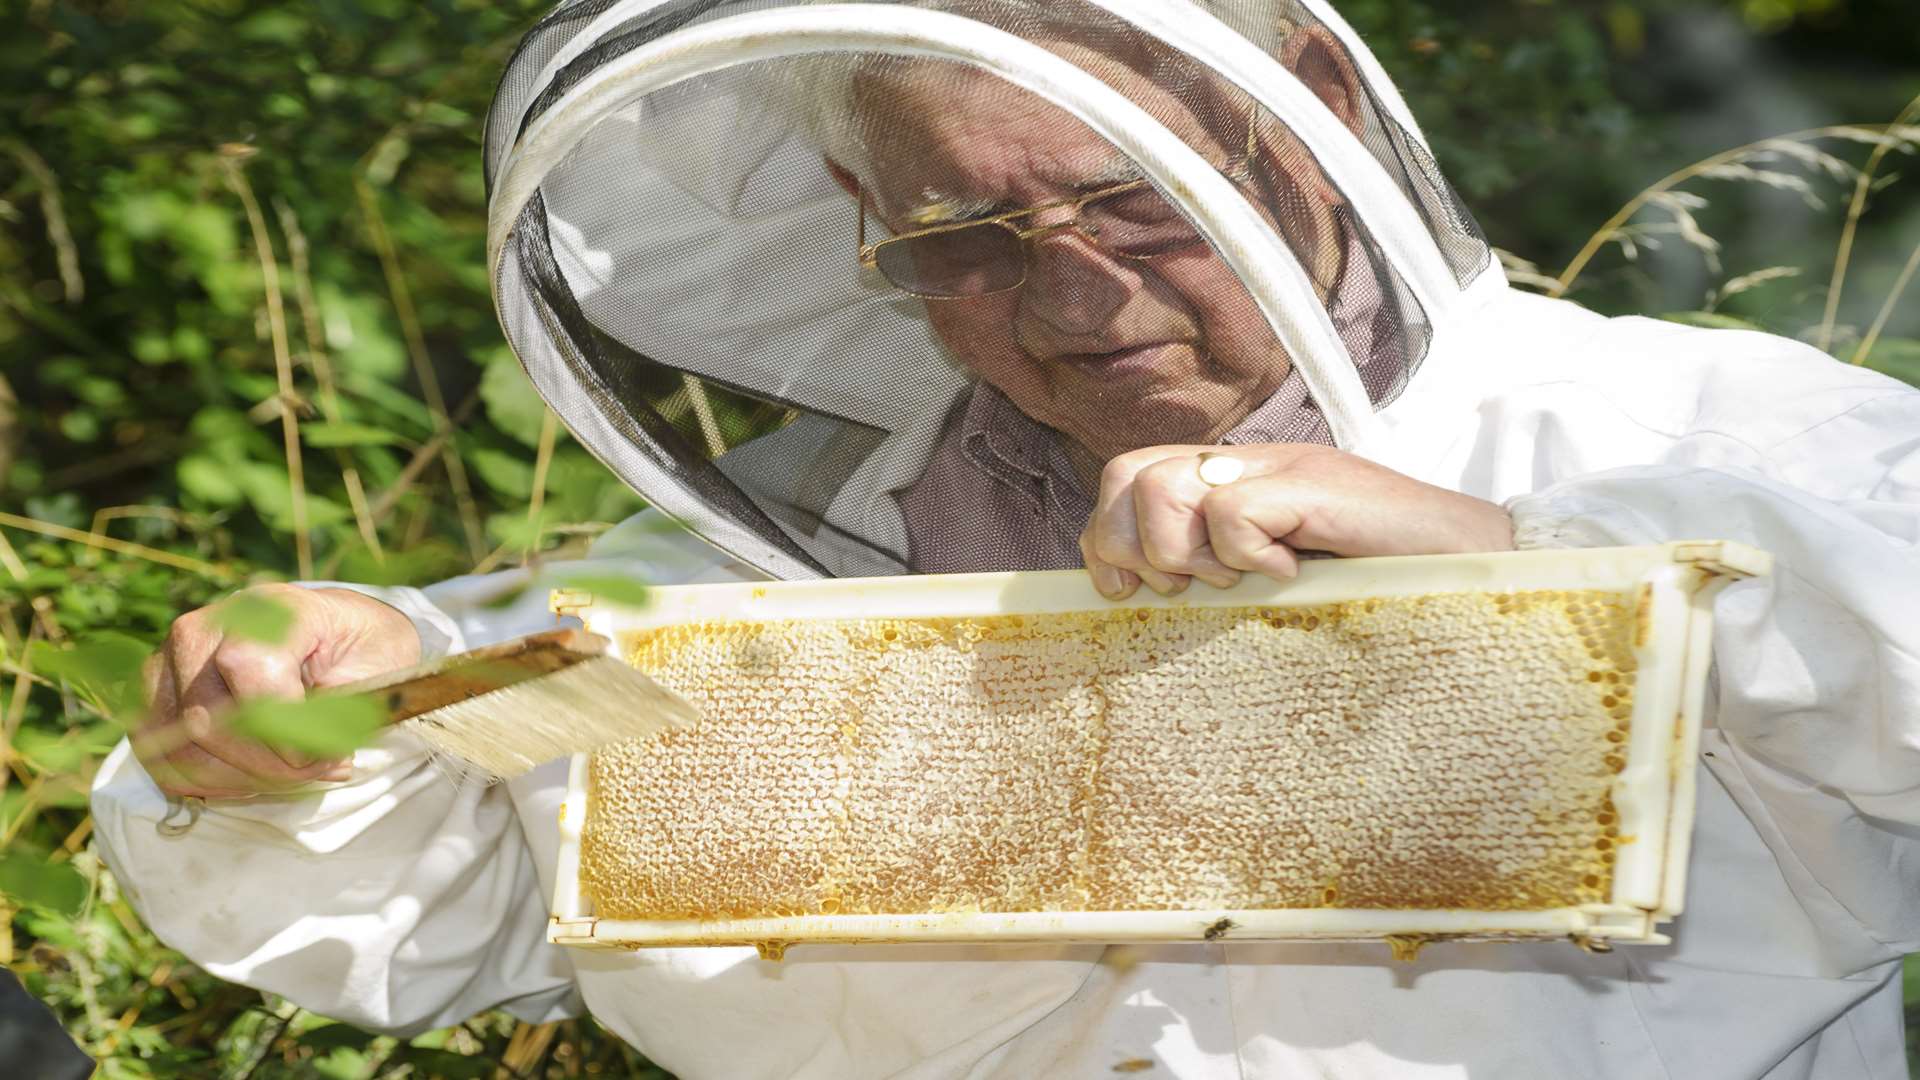 William Mundy opens up a suitable hive and begins extracting the combs.